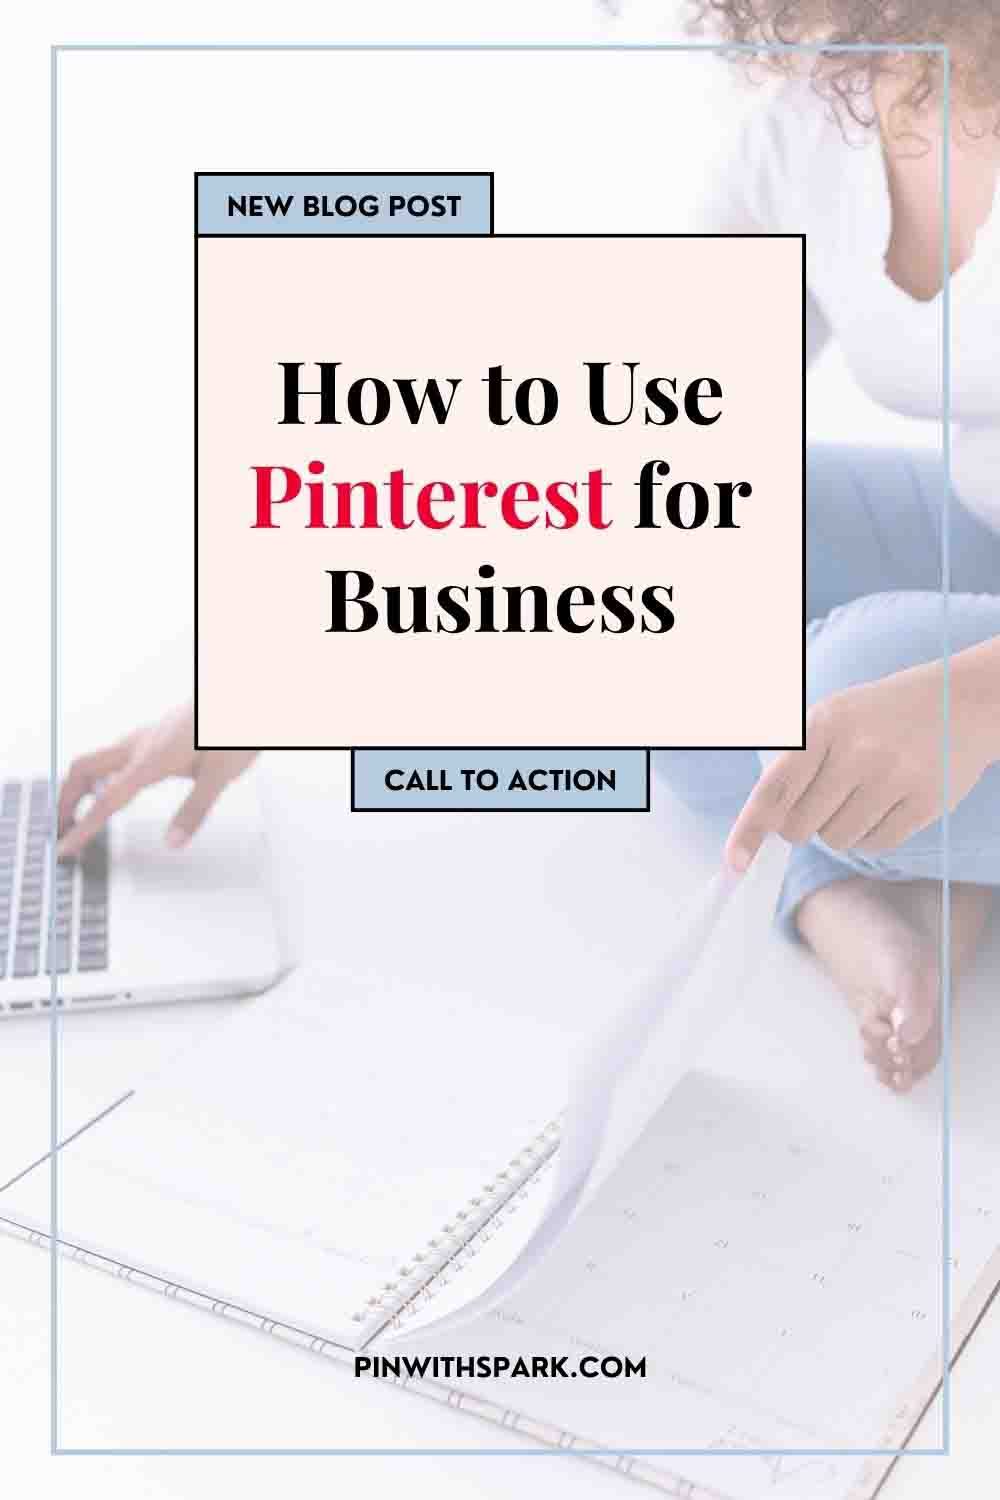 How to use Pinterest for business new blog post woman seated on floor with open laptop and open notebook Pinterest for business, pinwithspark.com